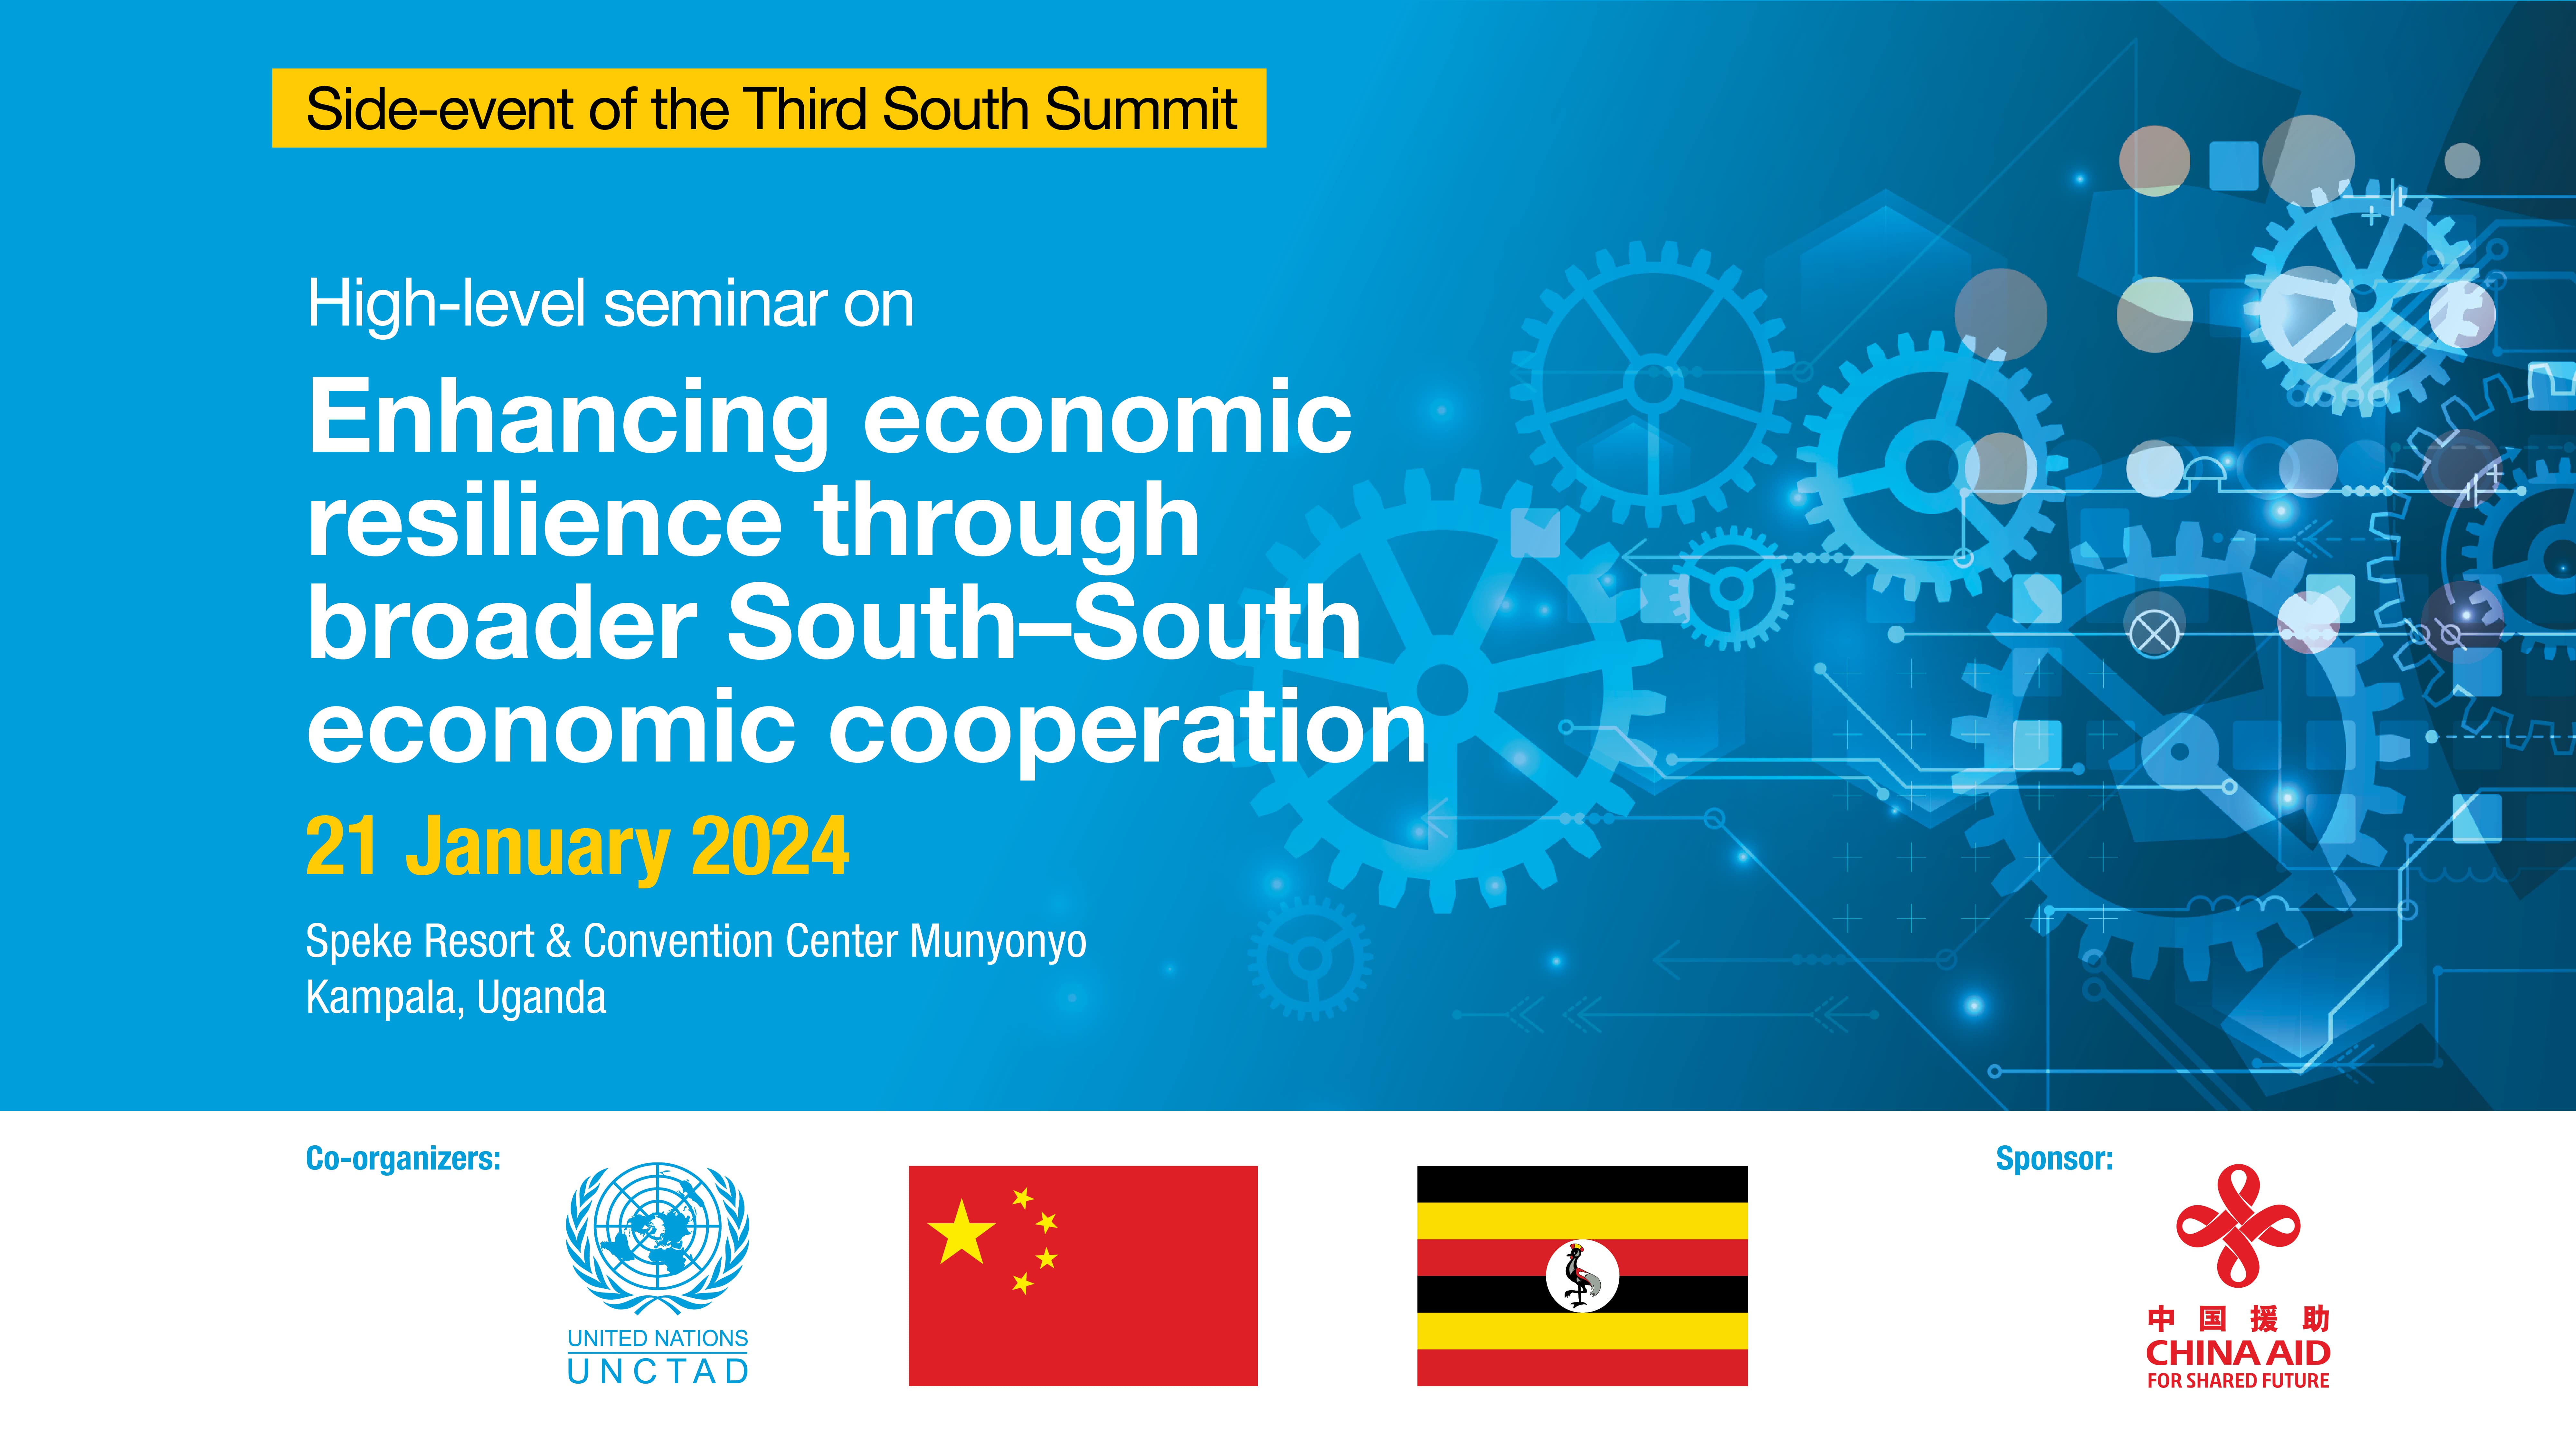 Side-event of the Third South Summit - High-level Seminar